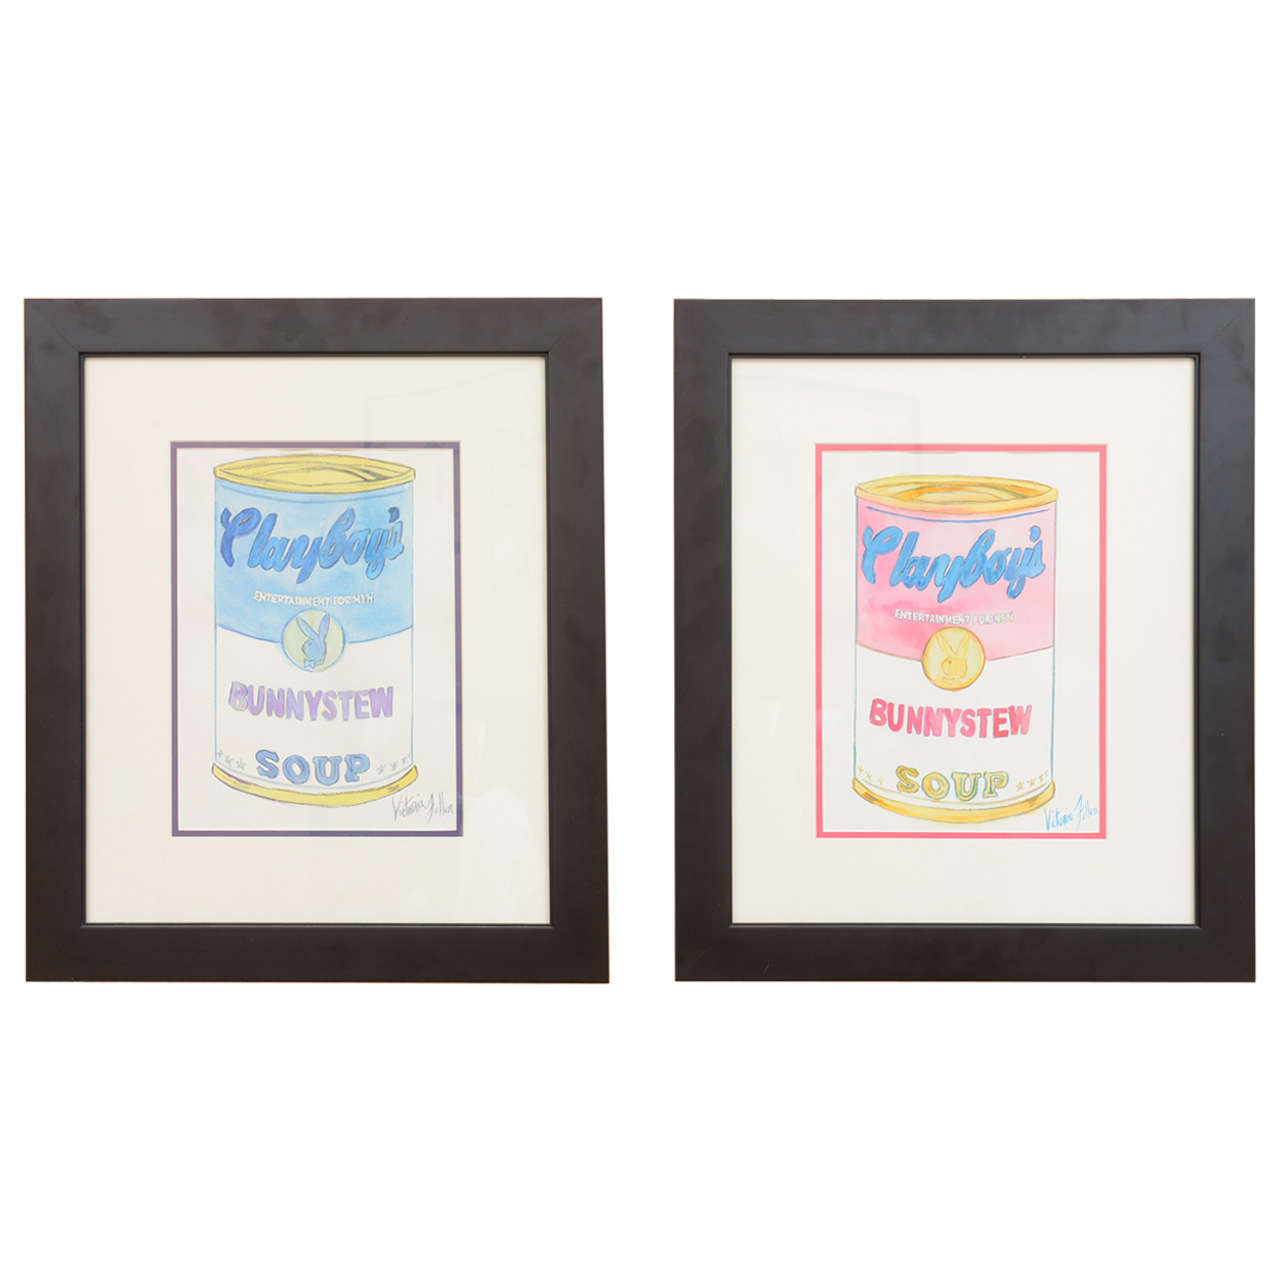 Original Pair of Watercolors by Victoria Fuller 2005, "Pink and Blue Bunny Stew"